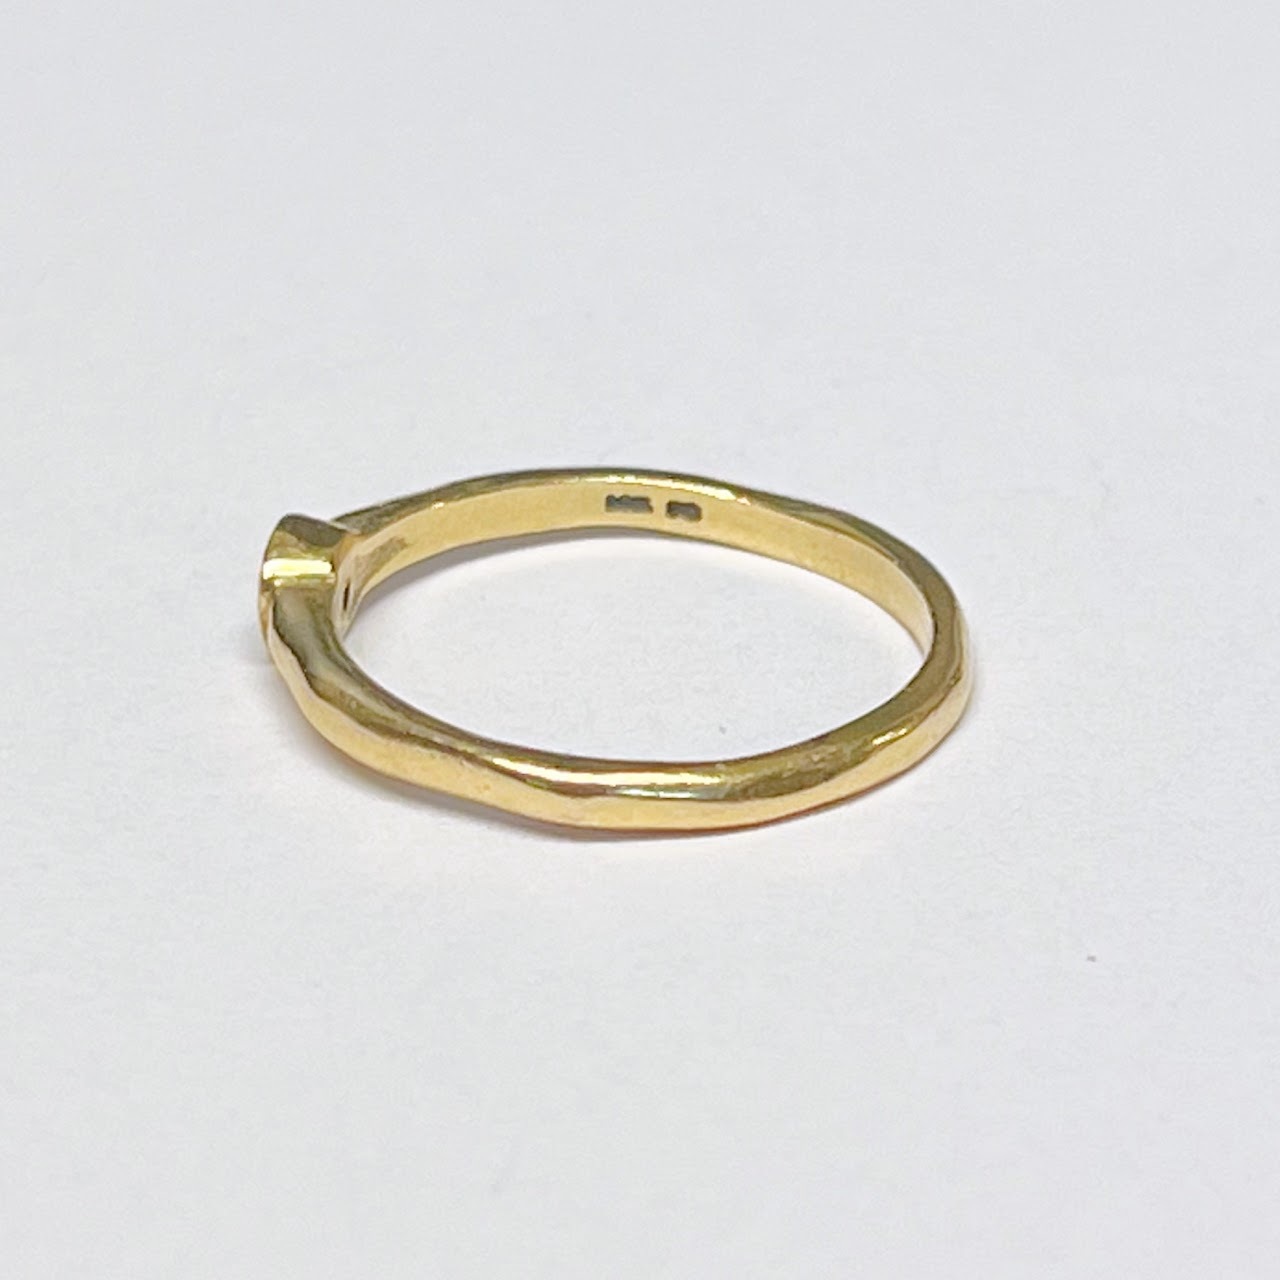 14K Gold Ring with Solitary Diamond